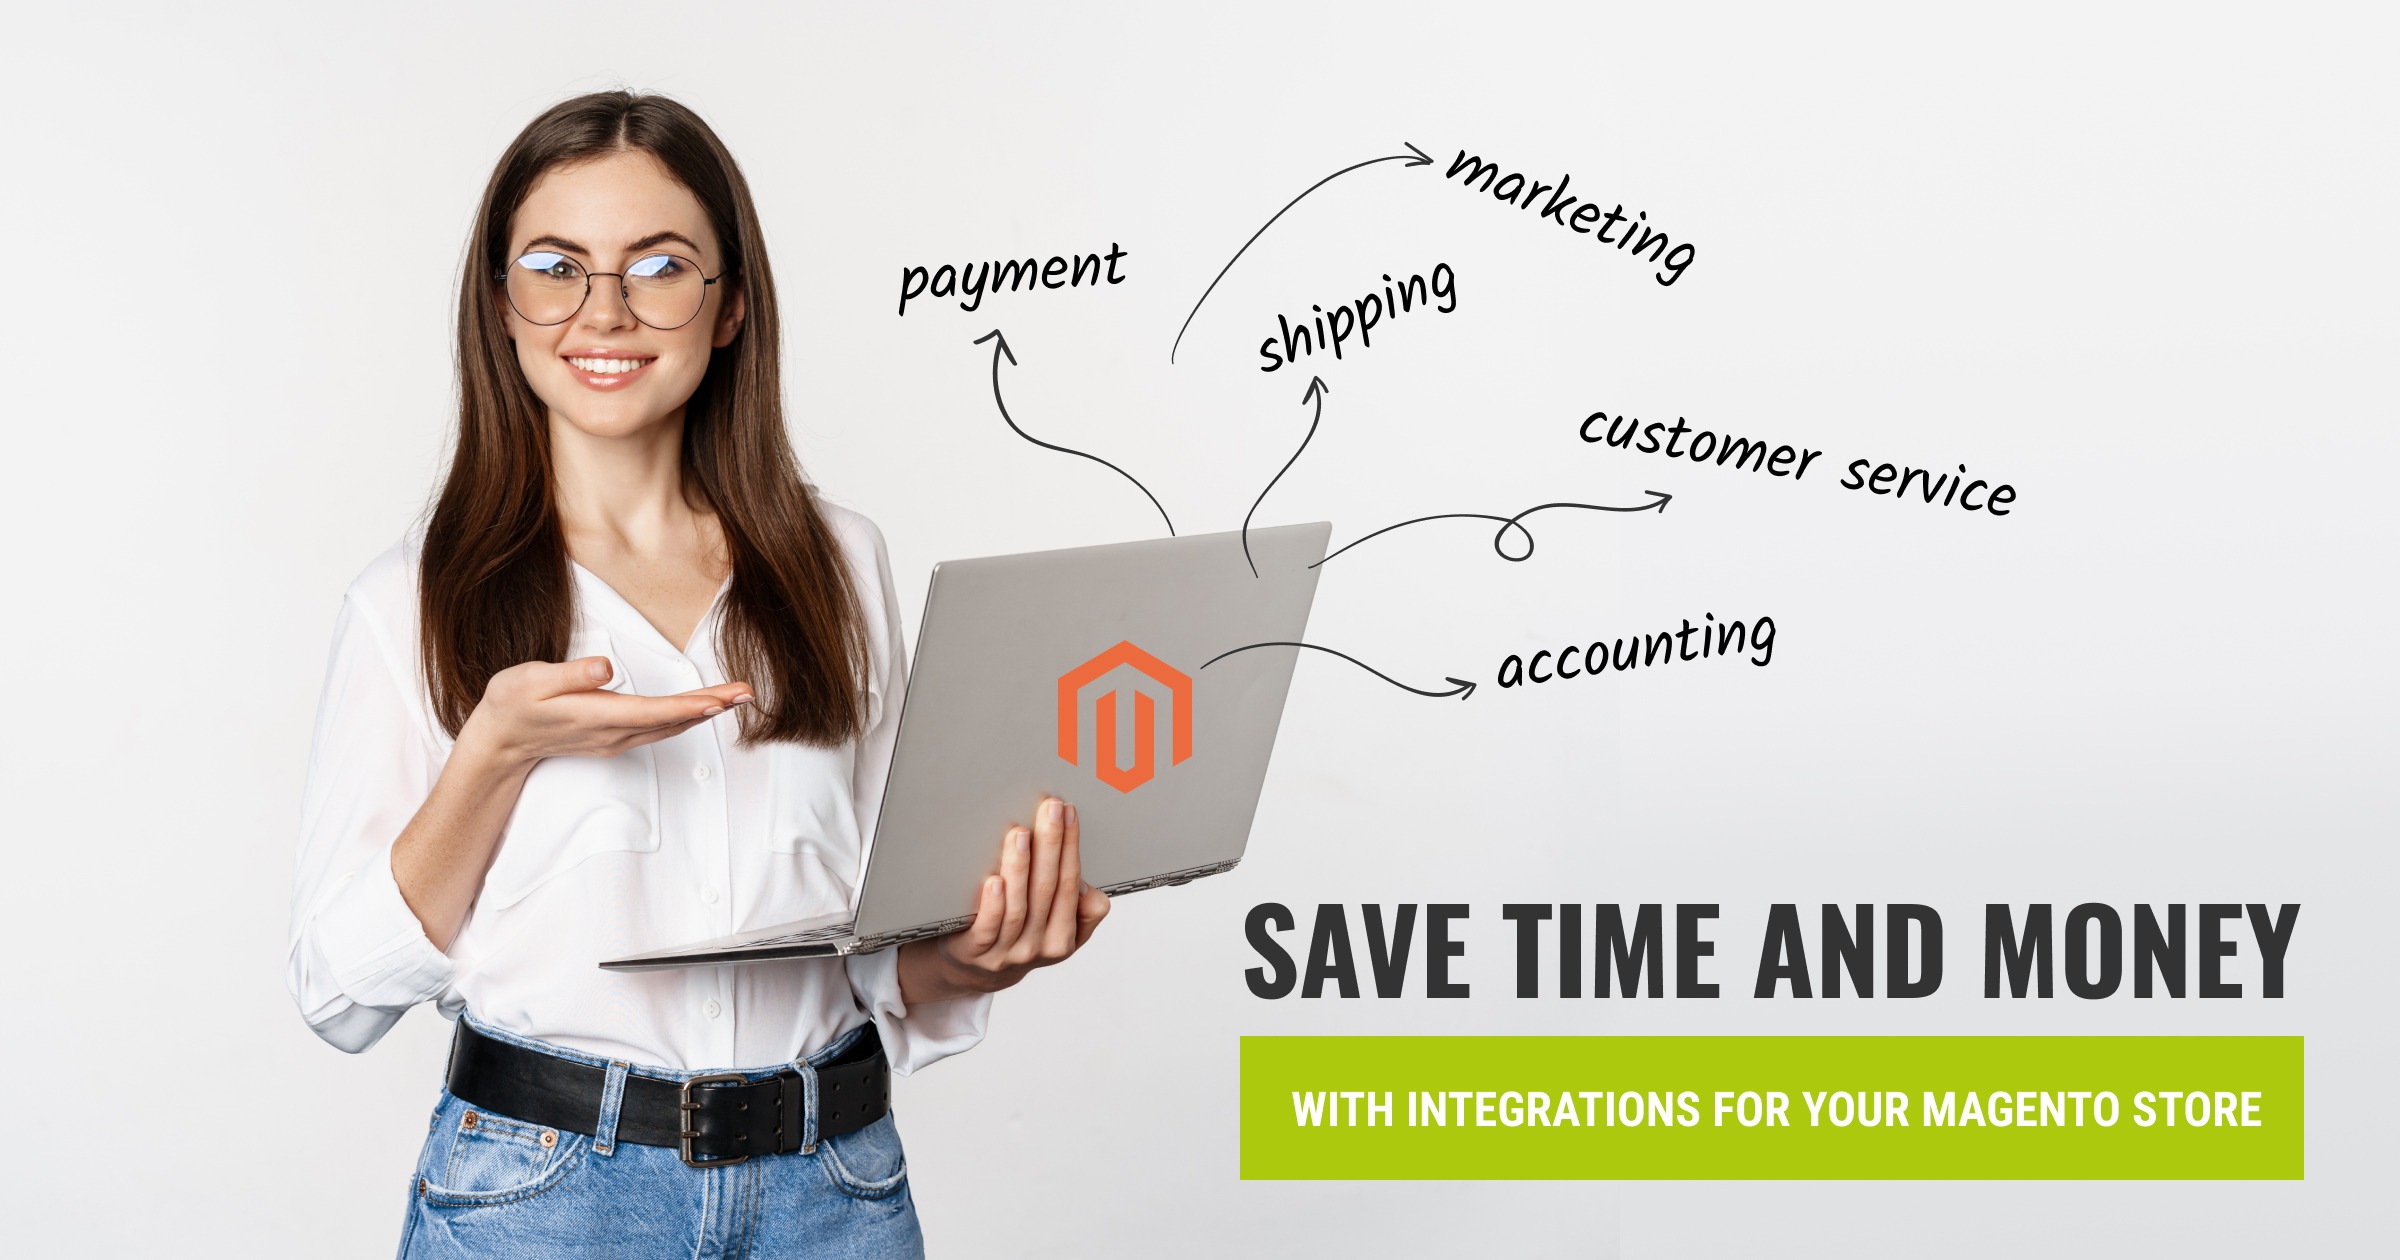 Save Time and Money with Integrations for Your Magento Store